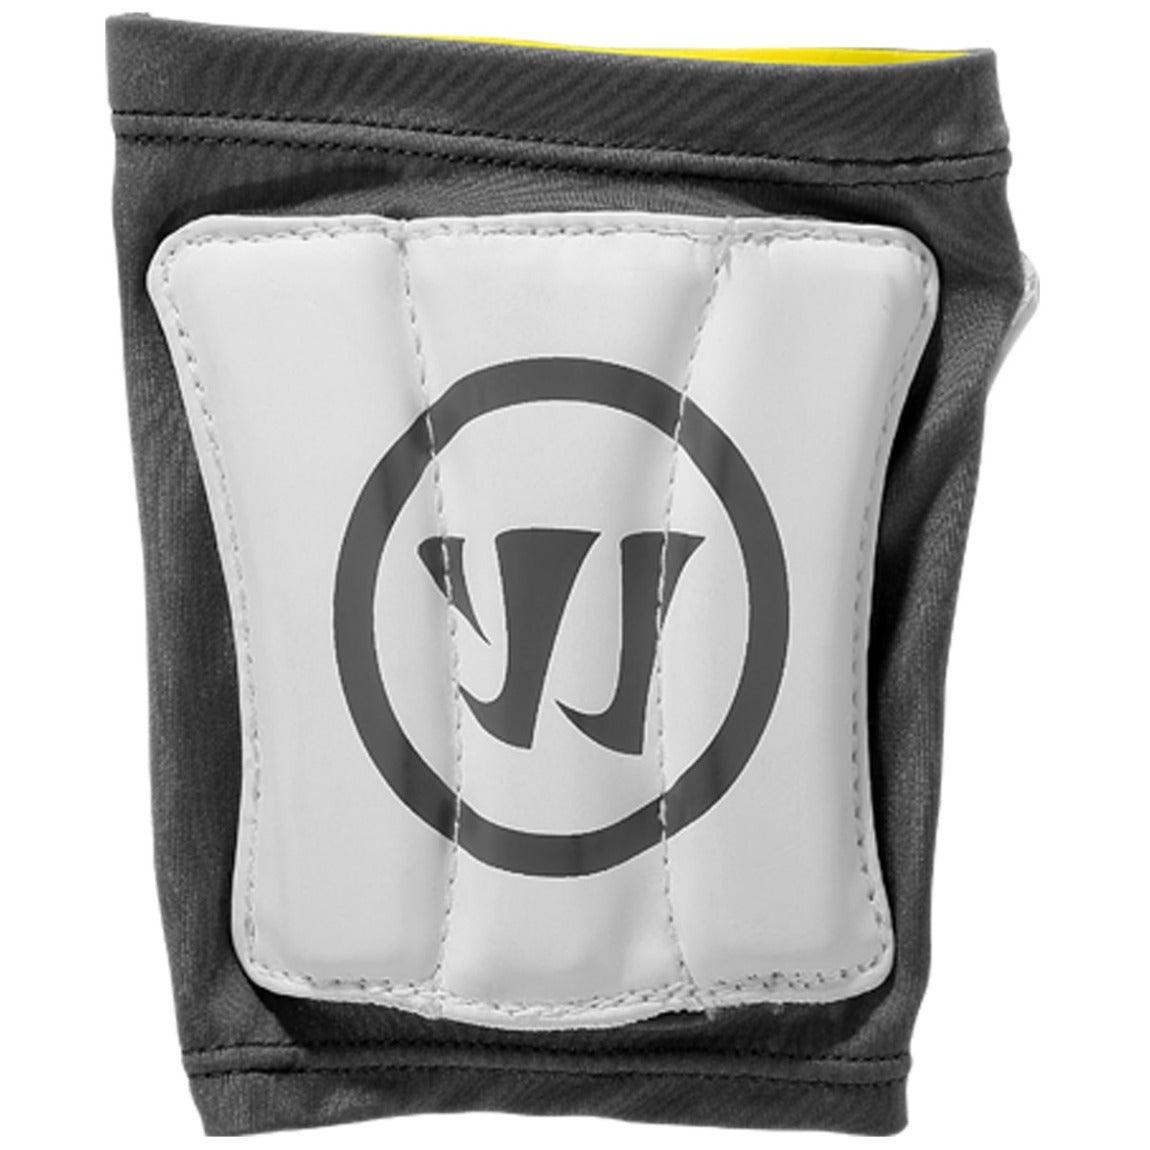 Wrist Guard - Sports Excellence